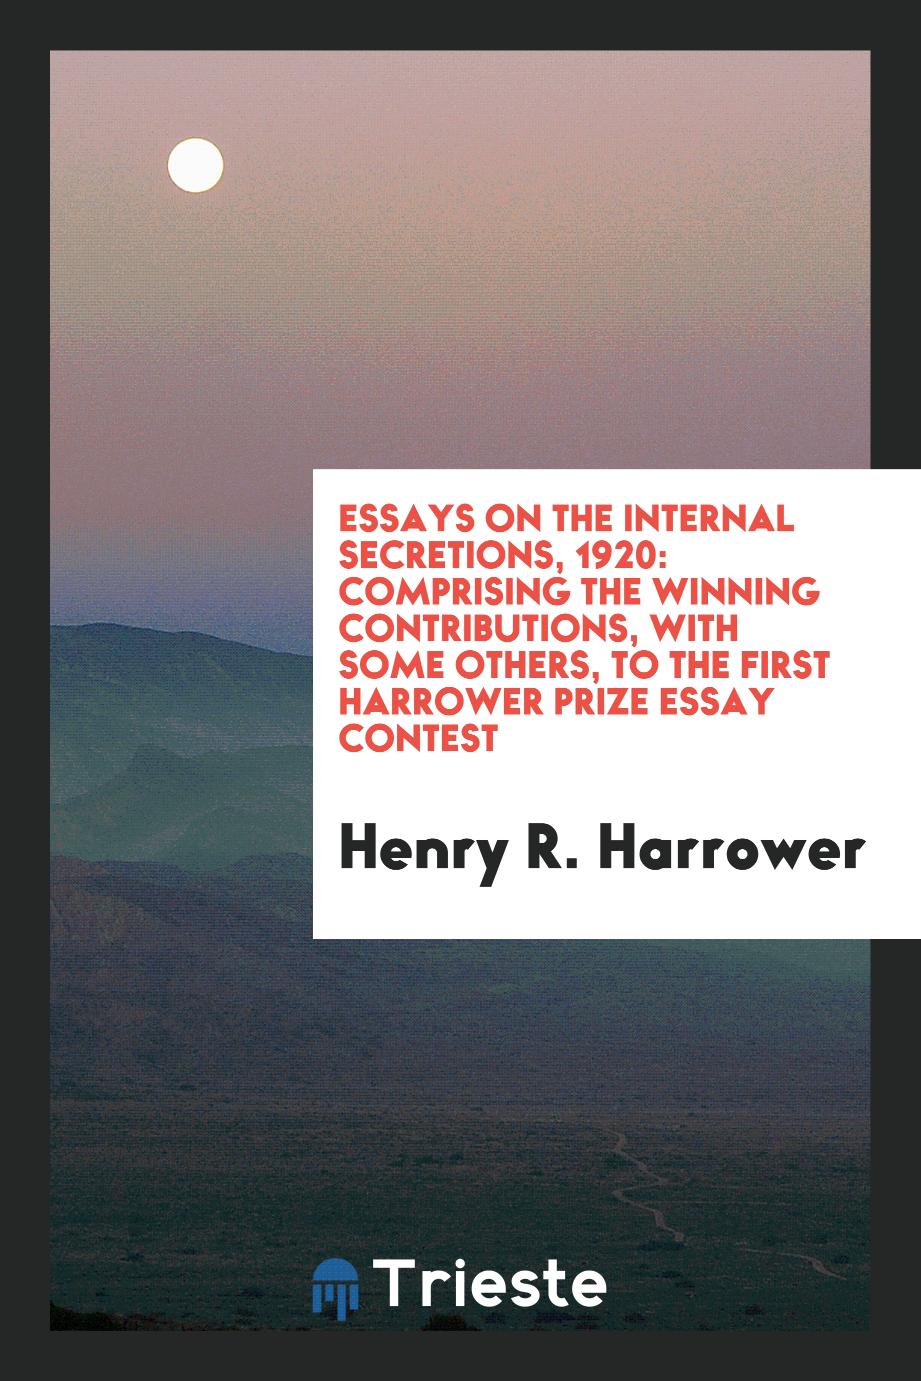 Essays on the Internal Secretions, 1920: Comprising the Winning Contributions, with Some Others, to the First Harrower Prize Essay Contest